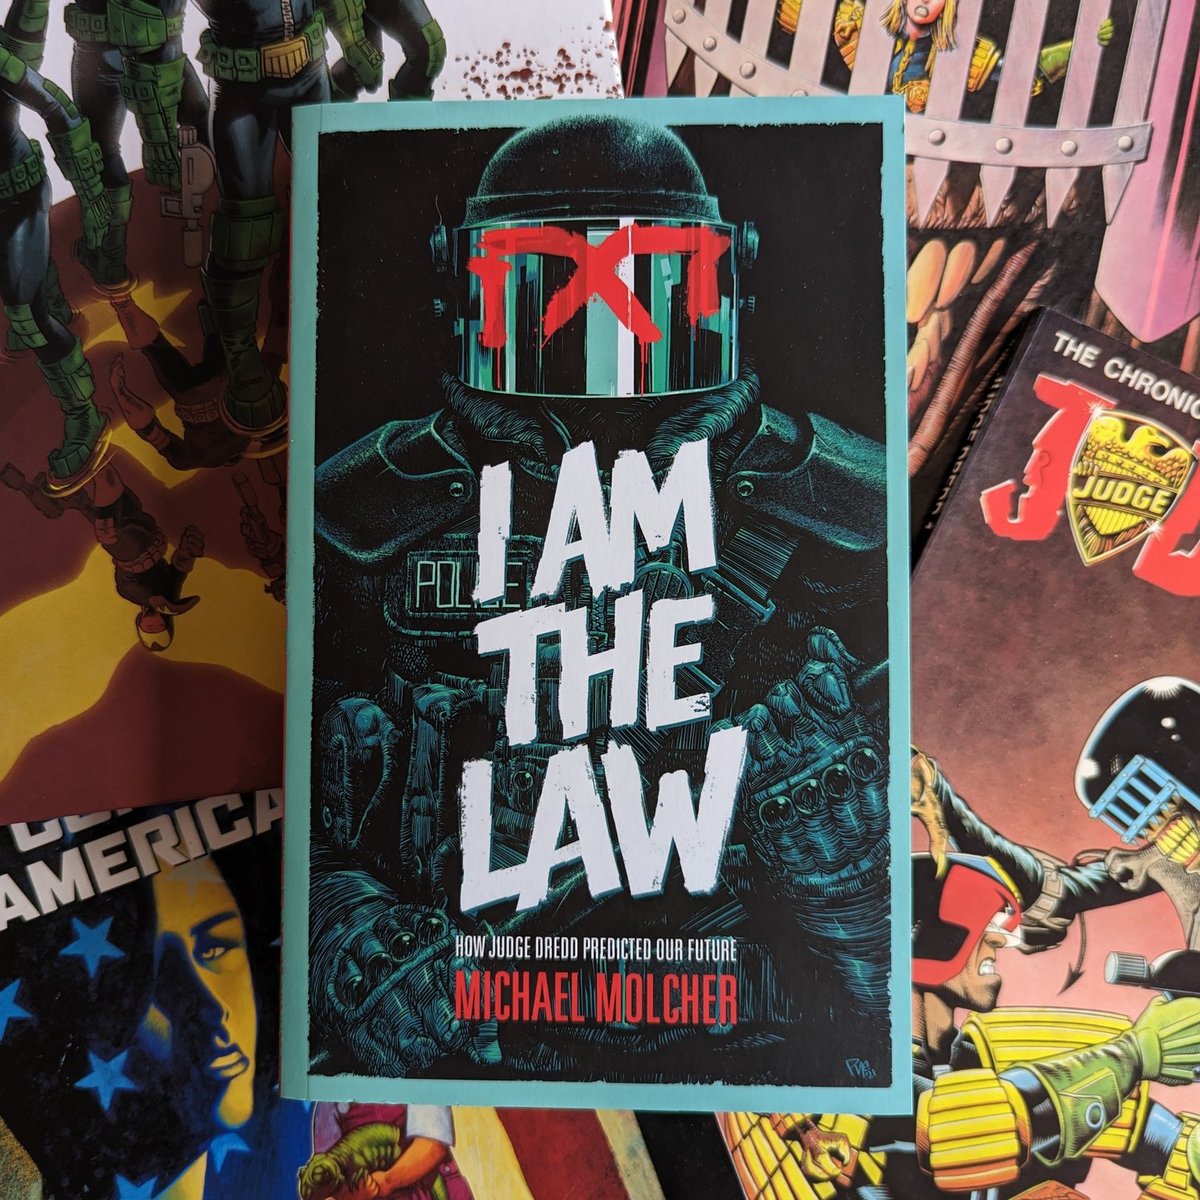 Did Judge Dredd predict the future? Blending comic book history with contemporary radical theories on policing, I AM THE LAW shows how a comic book warned us about the chilling endgame of today’s ‘law and order’ politics. Buy now ➡️➡️ bit.ly/3lNFPZF